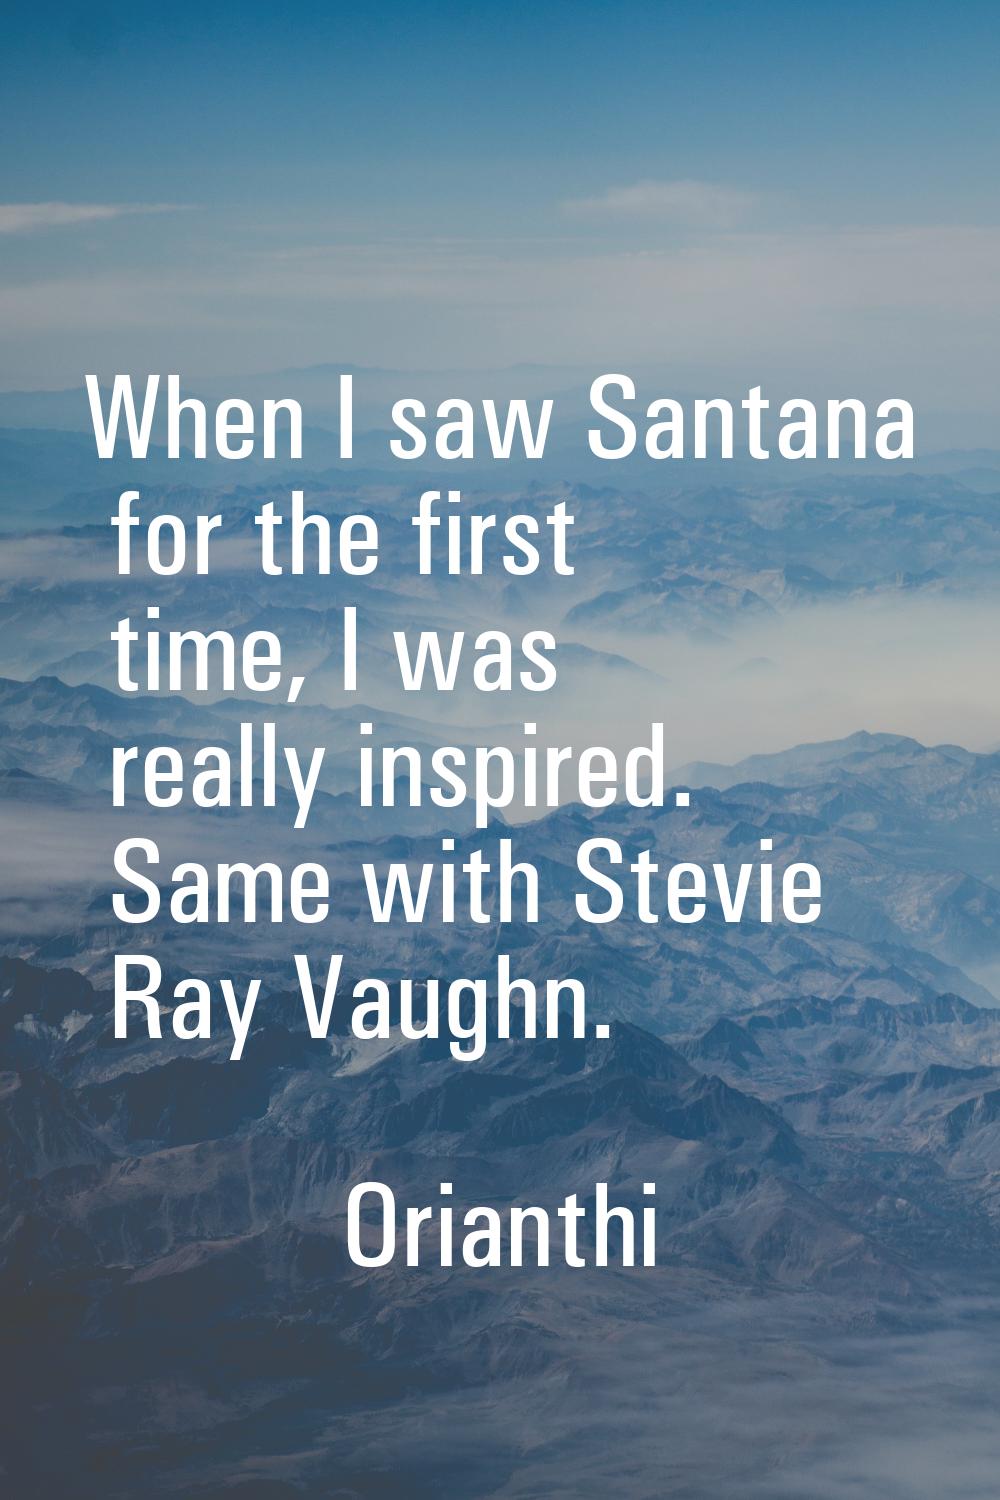 When I saw Santana for the first time, I was really inspired. Same with Stevie Ray Vaughn.